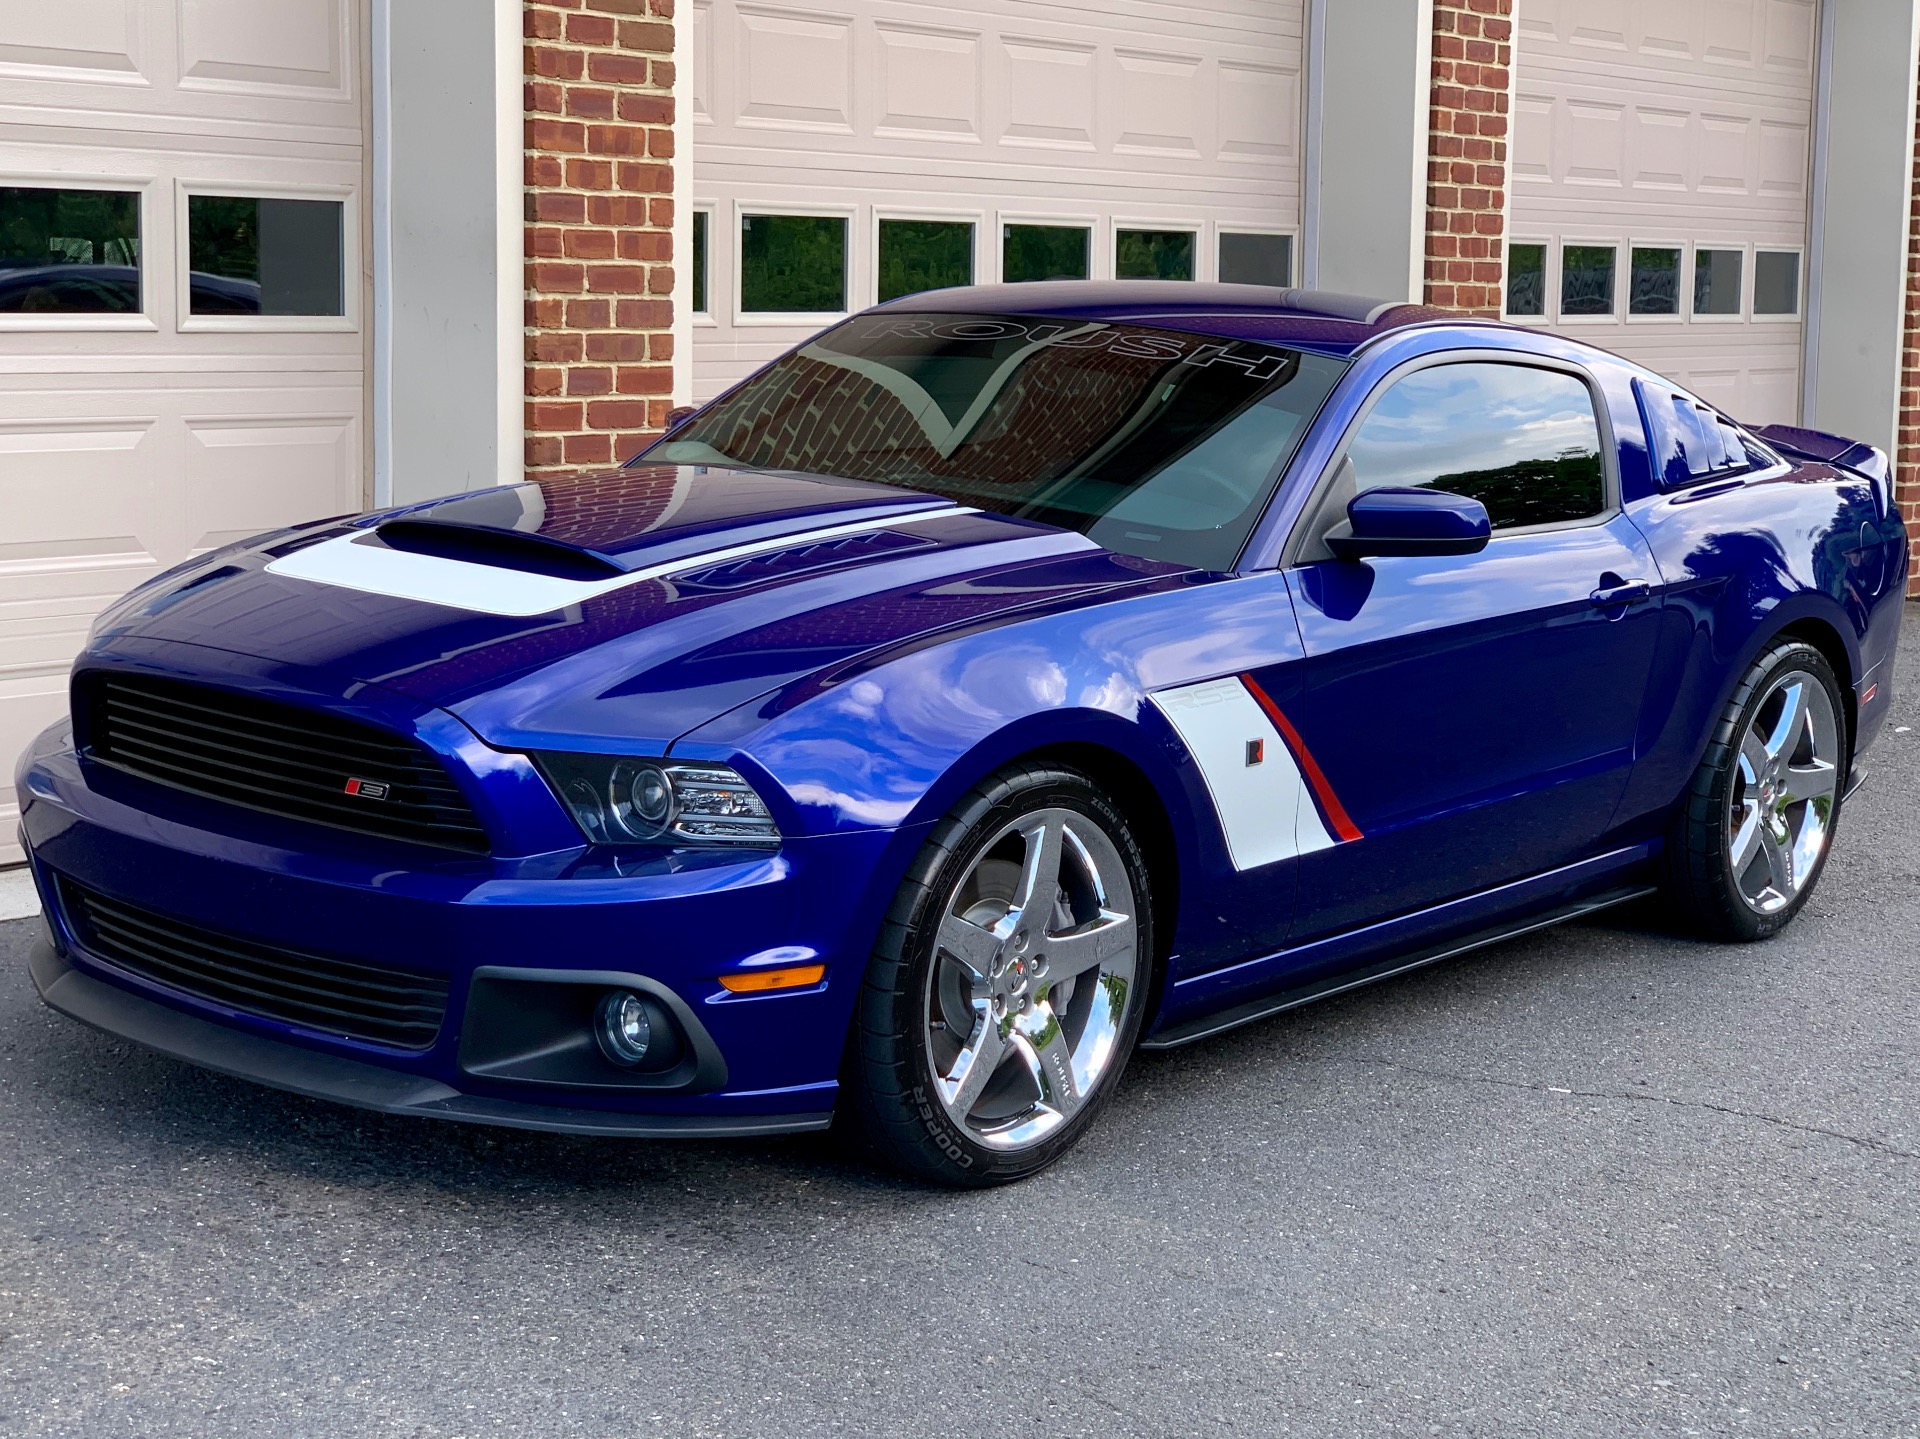 2014 Ford Mustang GT Premium Roush Stage 3 Stock 300529 for sale near